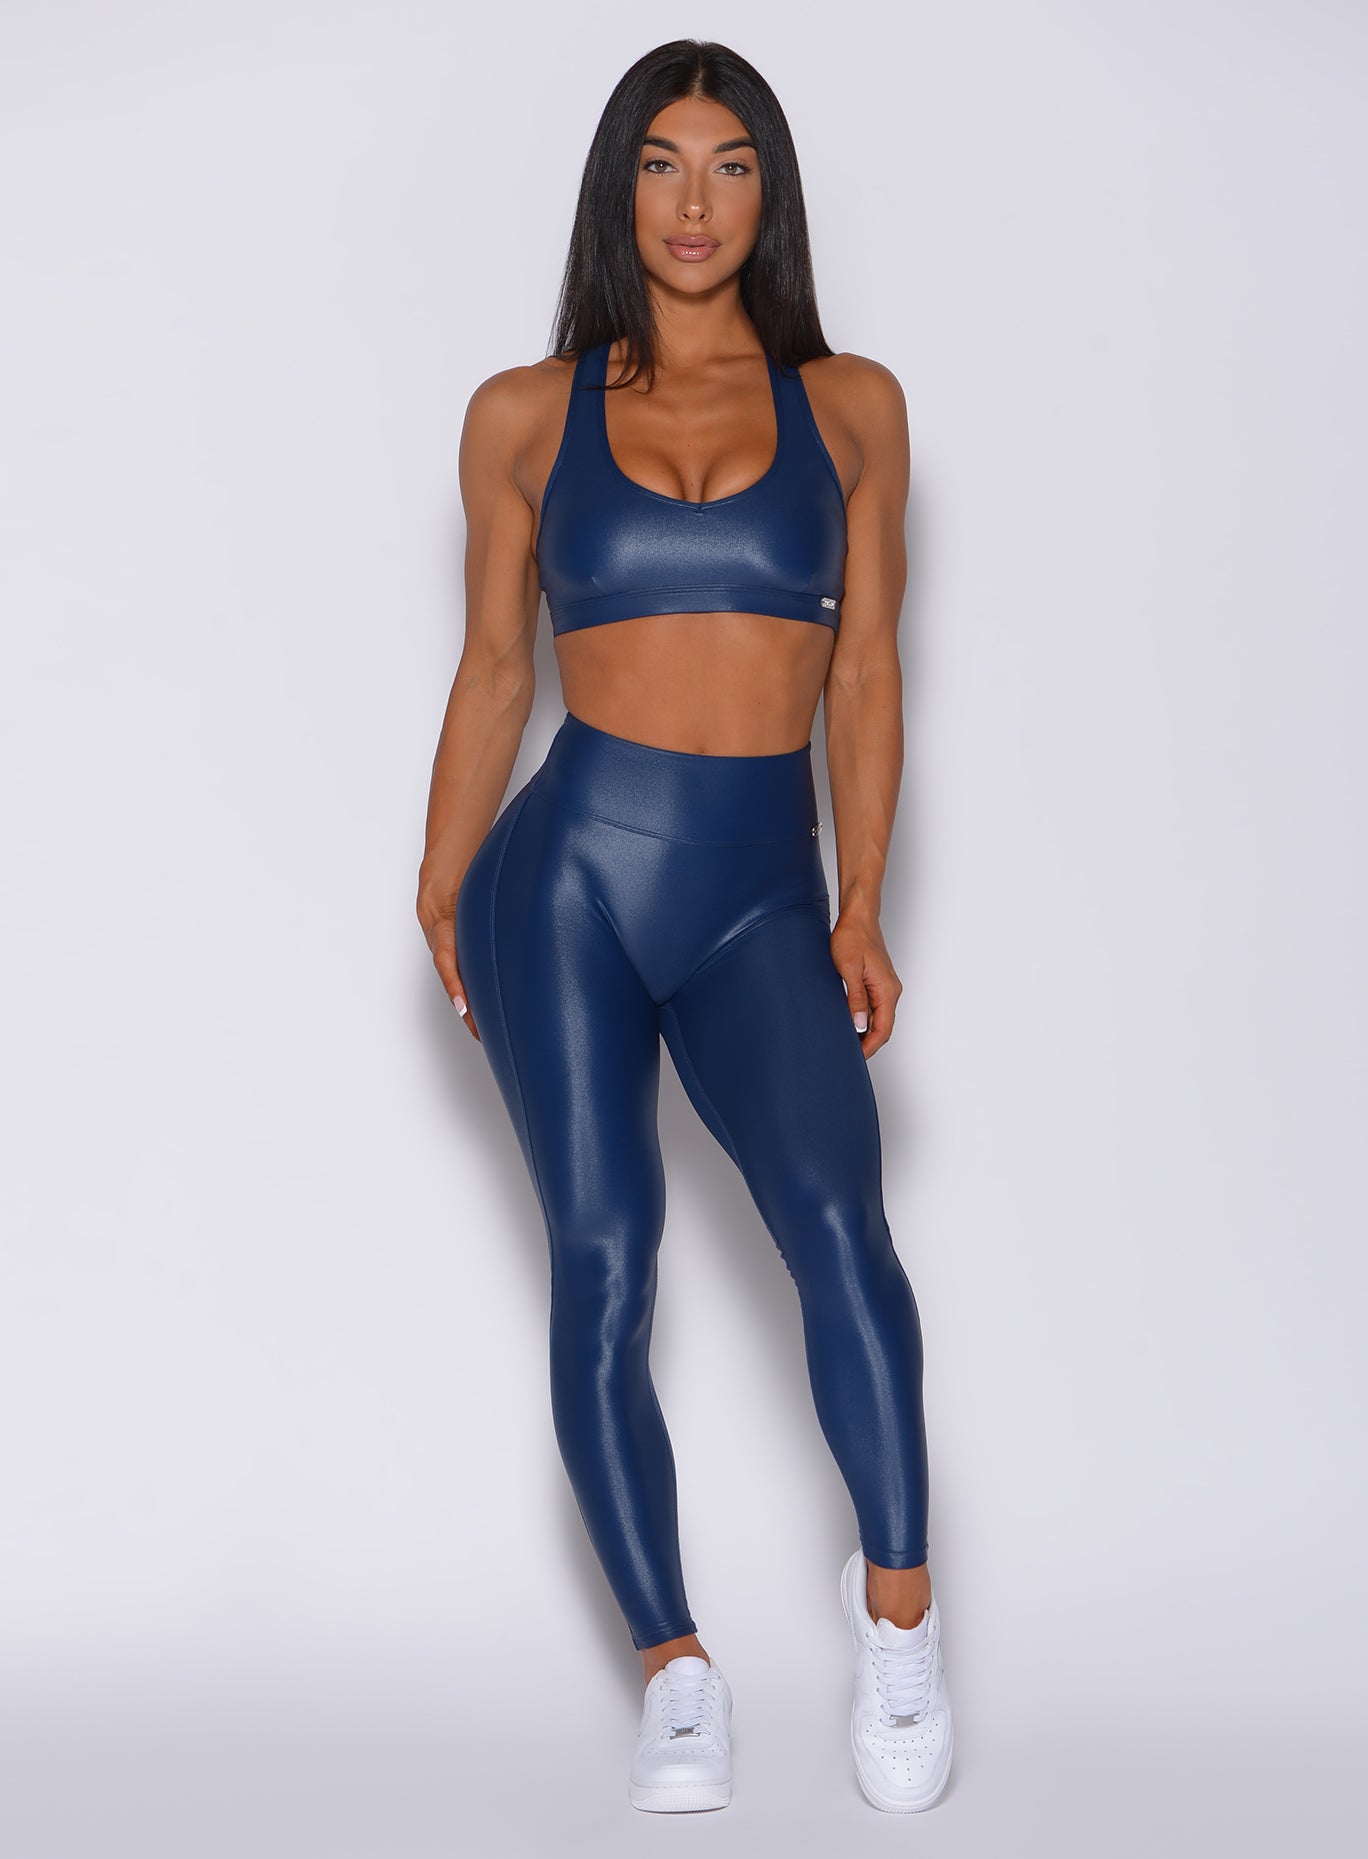 Front profile view of a model in our gloss navy leggings and a matching bra